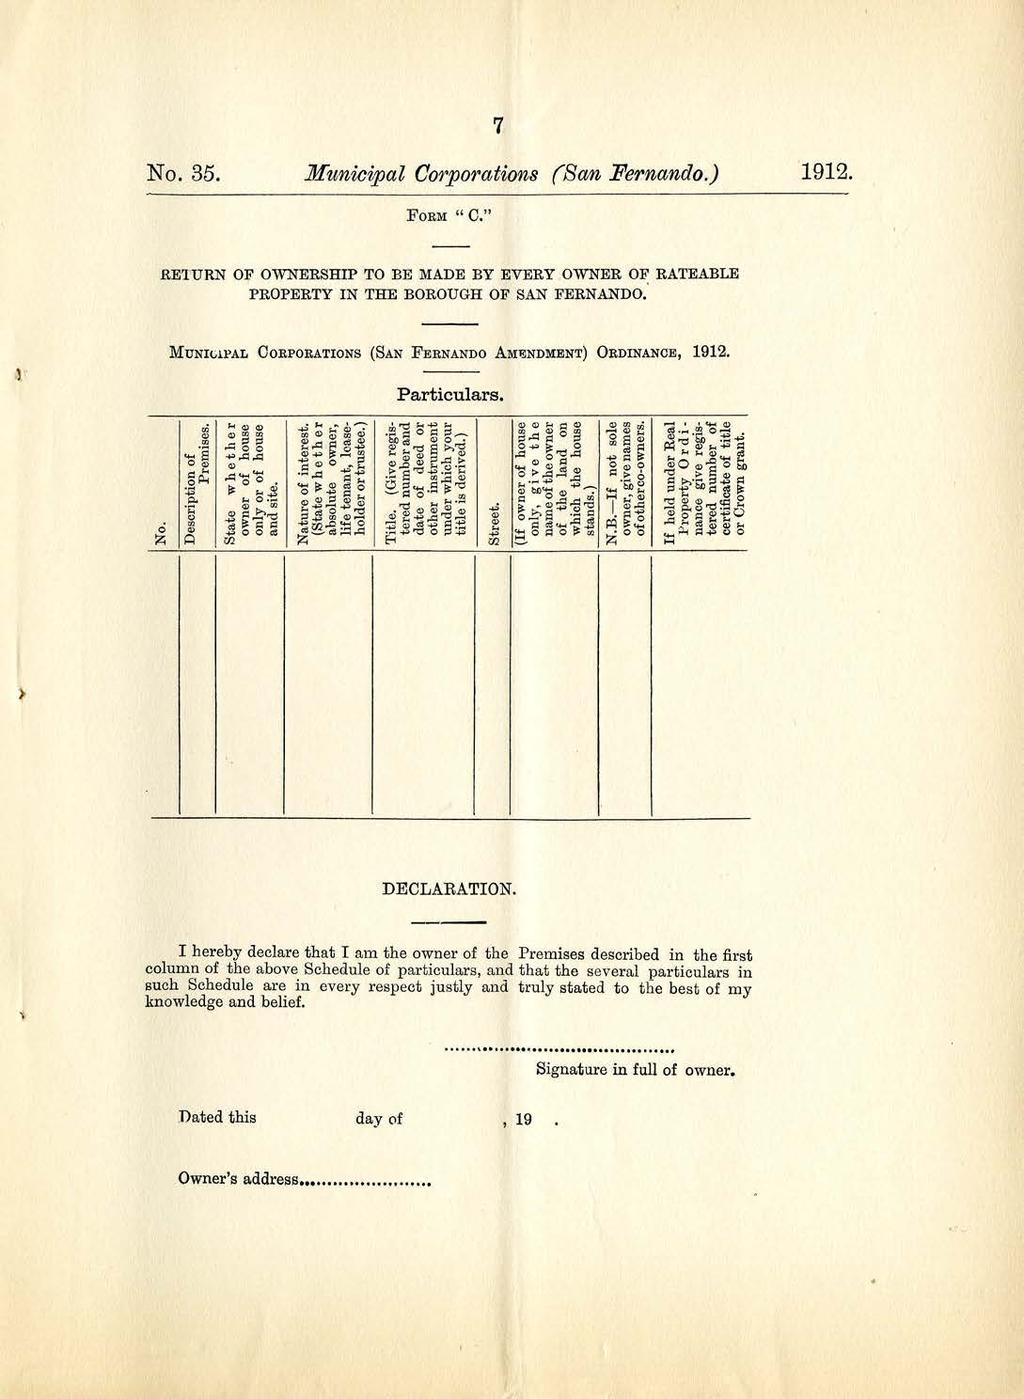 No. 35. 7 Municipal Corporations (San Fernando.) FORM " C." 1912. RETURN OF OWNERSHIP TO BE MADE BY EVERY OWNER OF RATEABLE PROPERTY IN THE BOROUGH OF SAN FERNANDO.